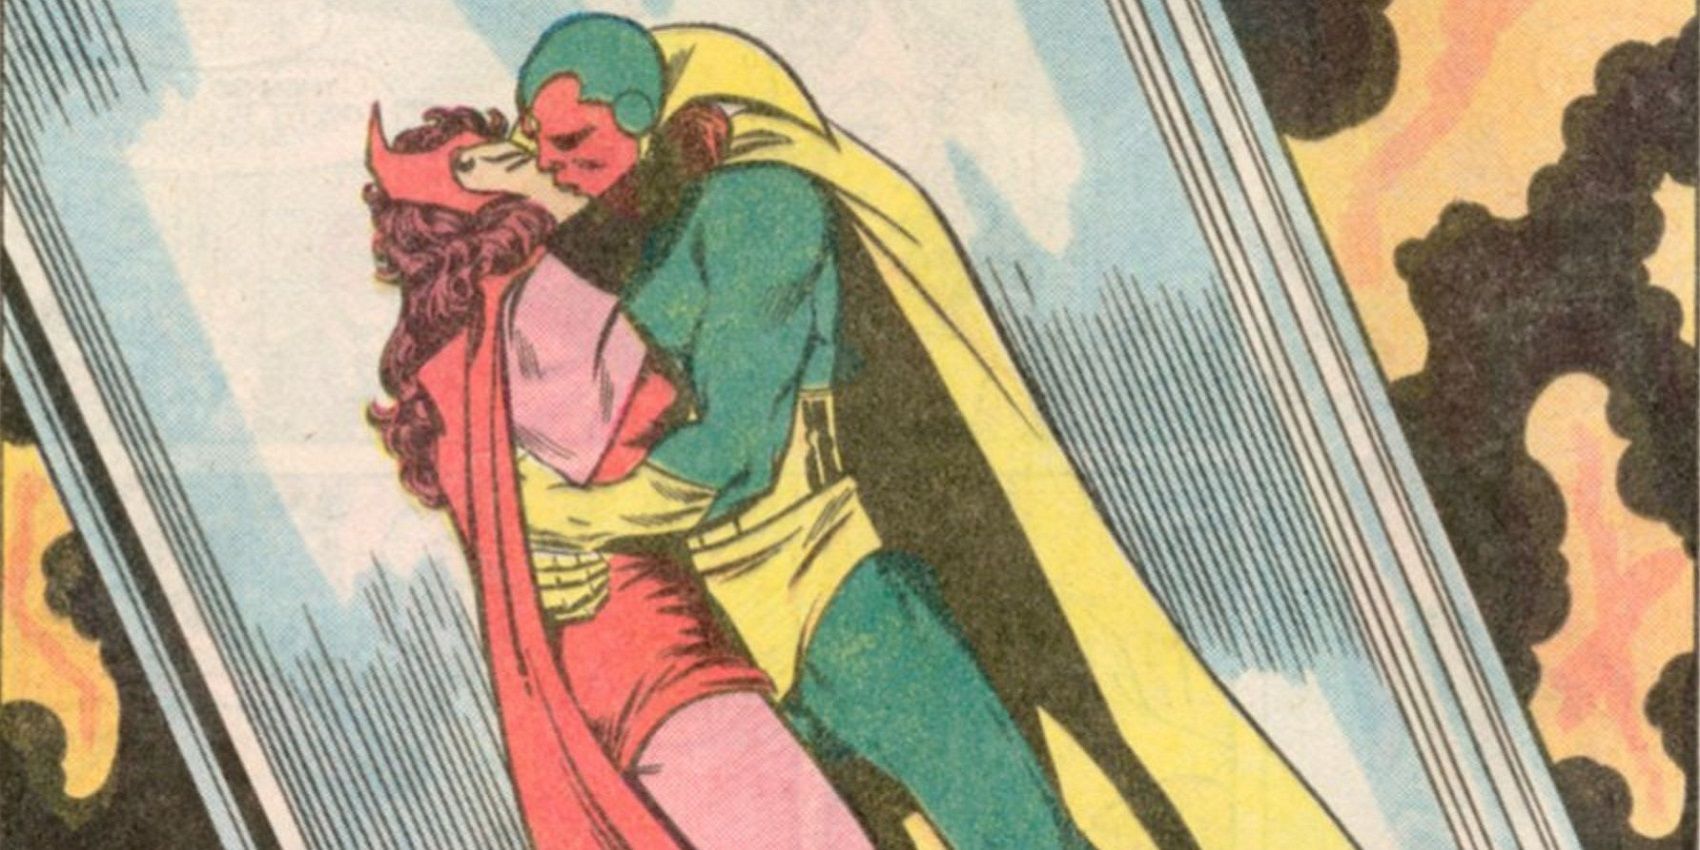 Scarlet Witch and Vision